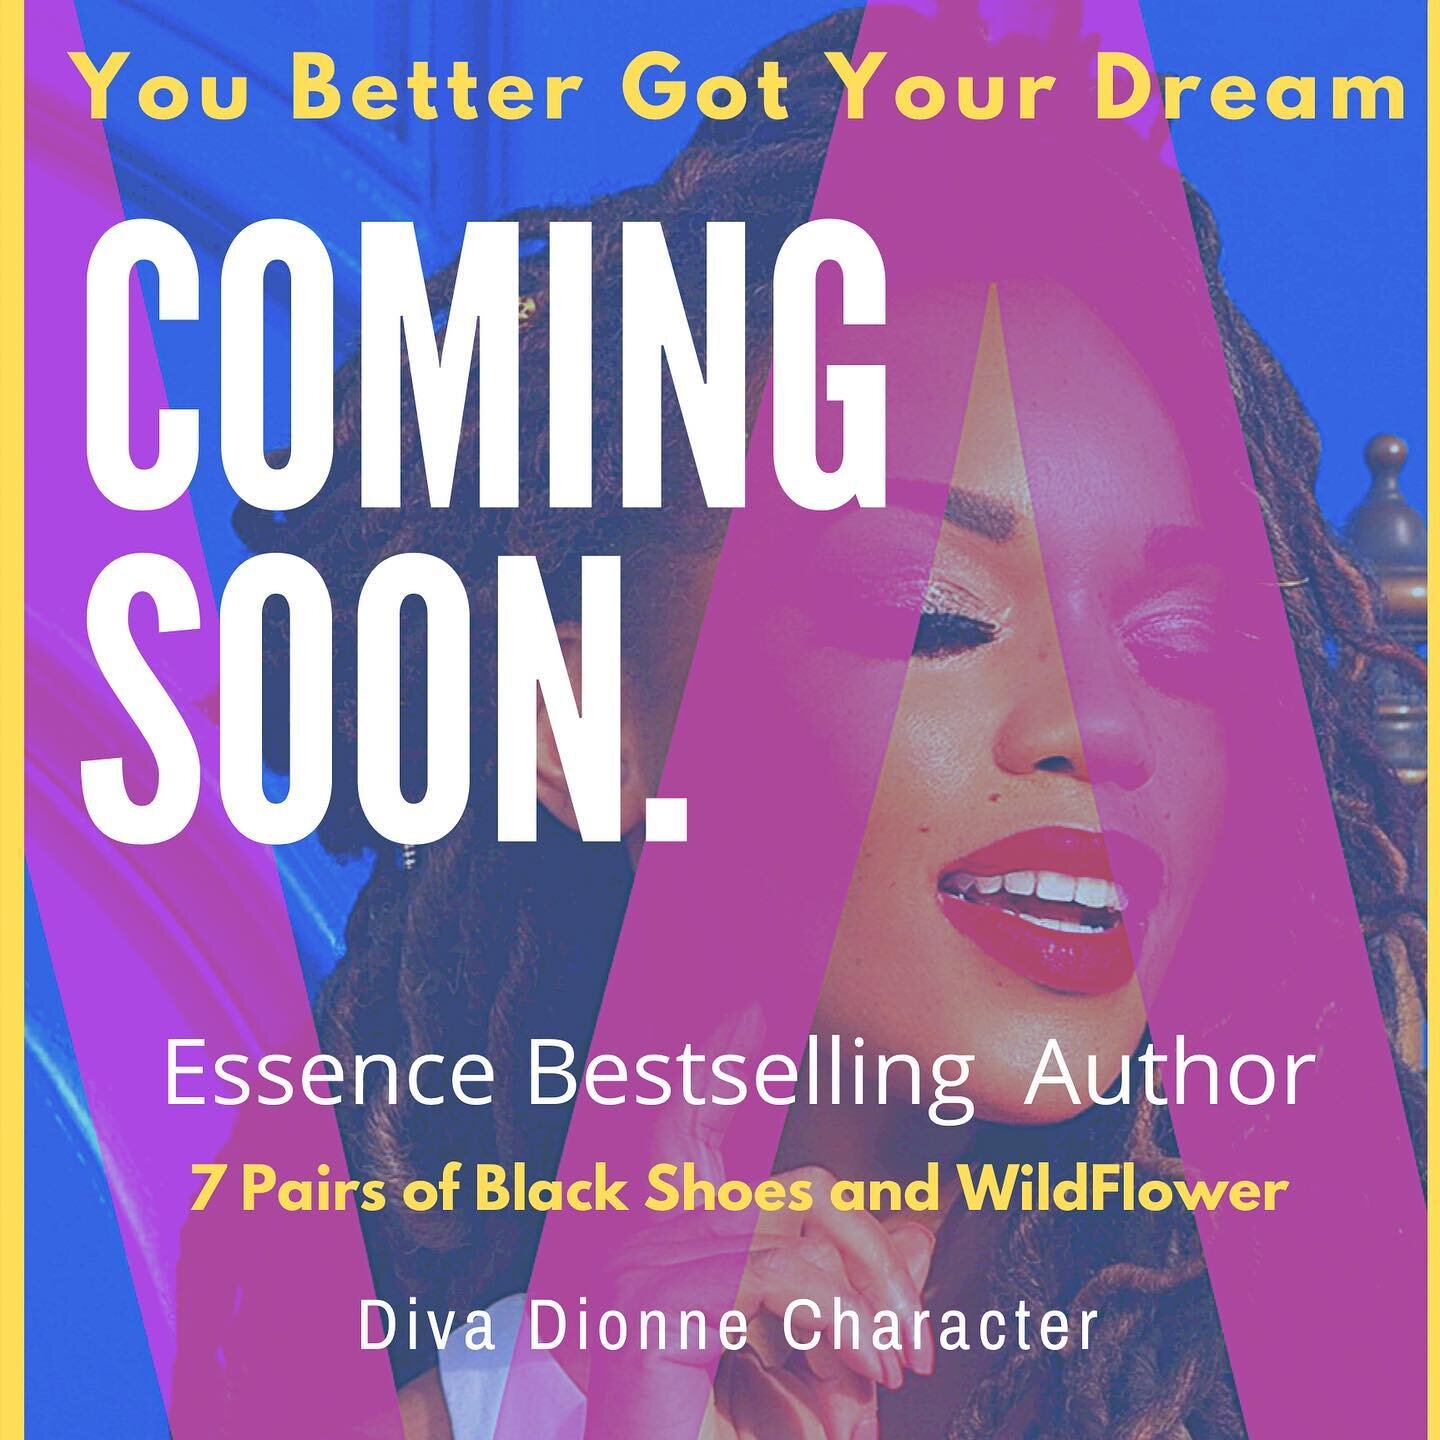 COMING SOON  In You Better Got Your Dream - Dionne Character reminds us that &mdash; A Women is one of the most powerful on the universe when she taps into her Spiritual Creativeness &mdash; becoming unbroken by the fearful things that have been hold